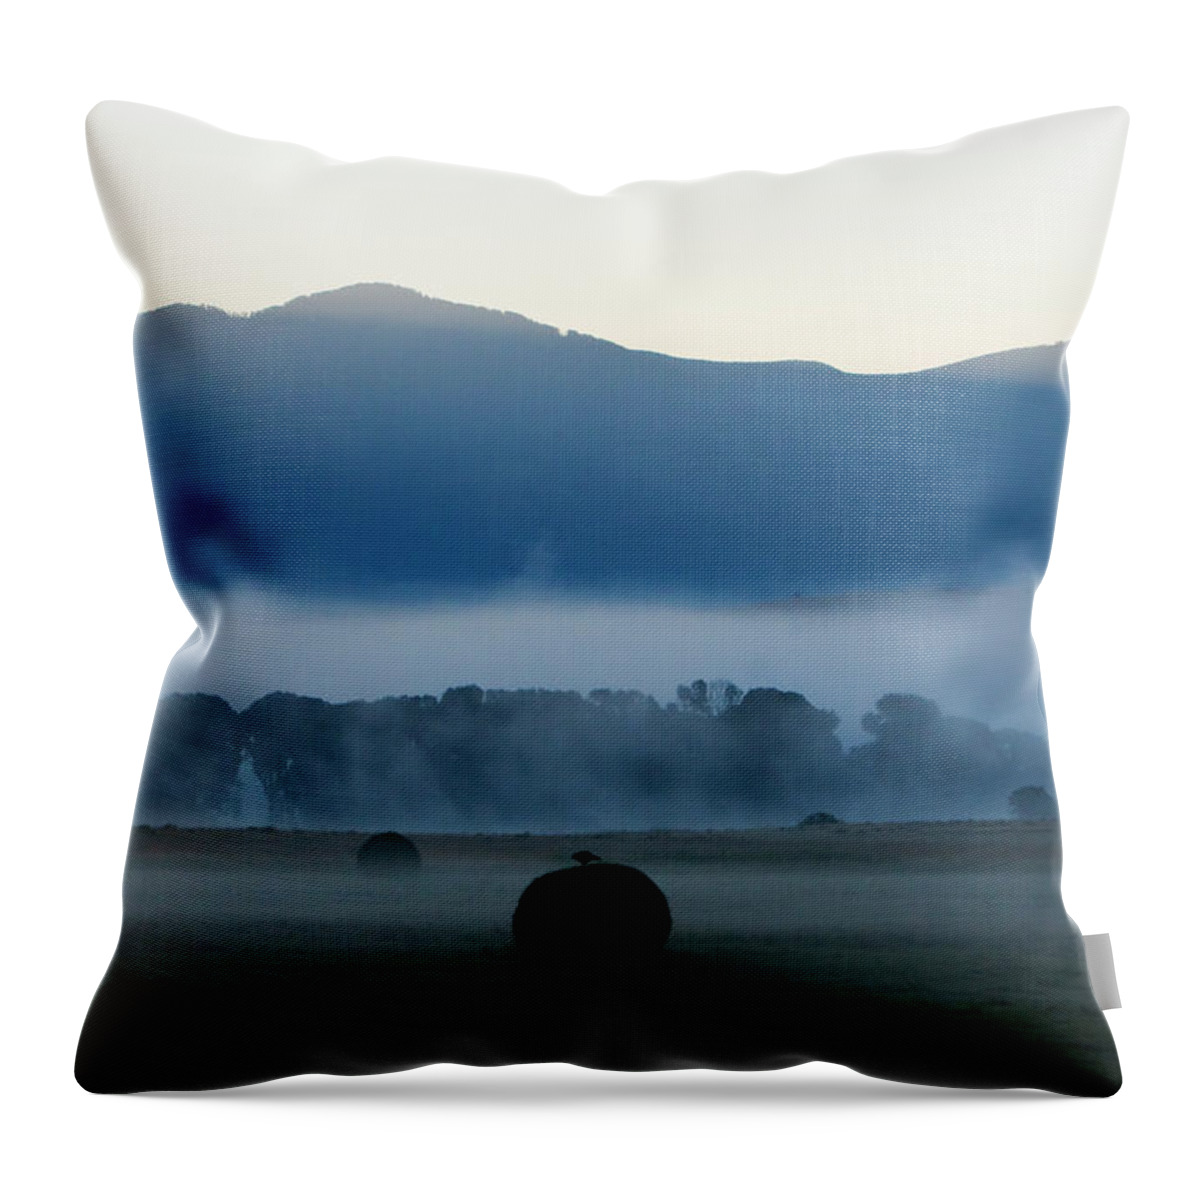 Bale Throw Pillow featuring the photograph Moody And Misty Valley Sunrise by Mark Miller Photos